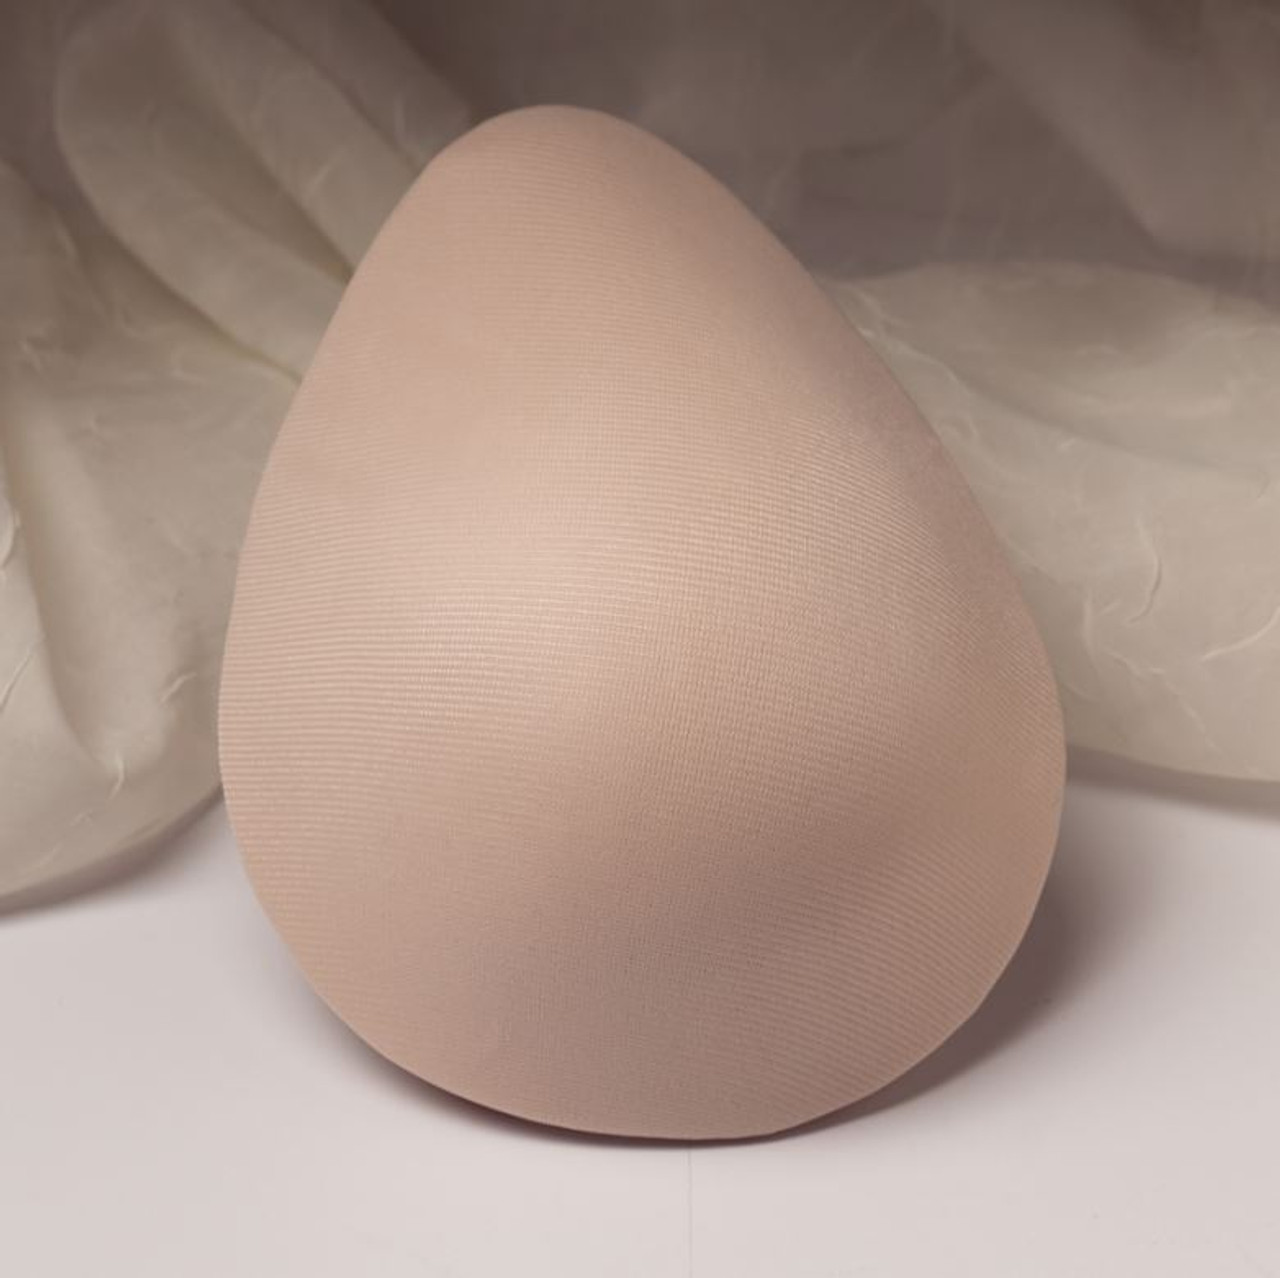 Mastectomy & Prosthetic Bra Inserts, Breast Forms [ON SALE]